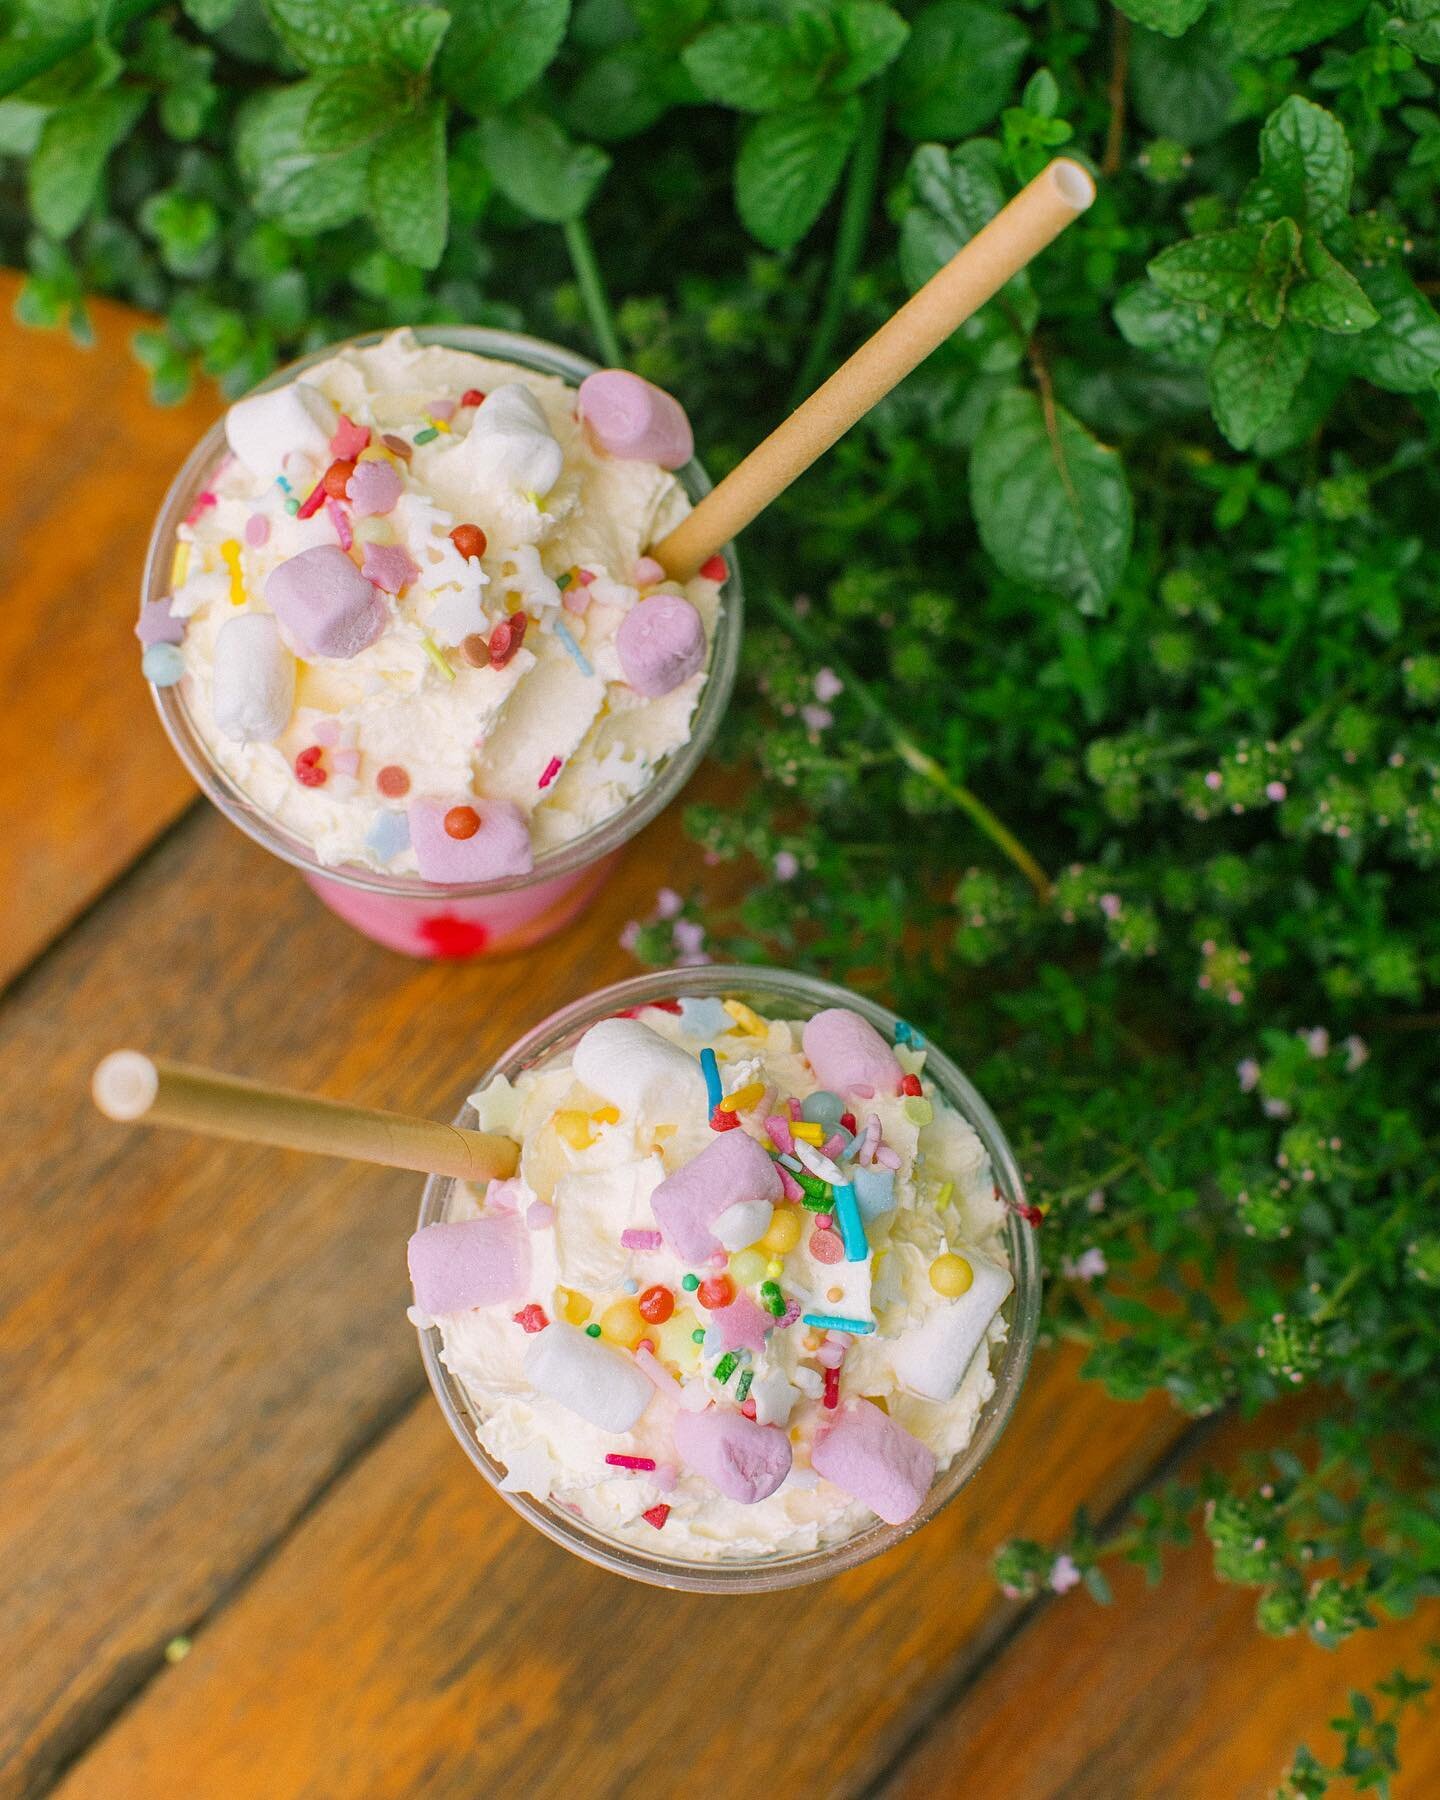 Have you heard the news? UNICORN SHAKES are back for the school holidays!! 🦄✨ We are open from 8:30am-2:30pm Wed-Fri &amp; 9am-3pm Sat-Sun! See you soon for a school holiday treat!! 😻🙊 #unicornshake #unicornmilkshake #thetrailcafe #schoolholidayfu